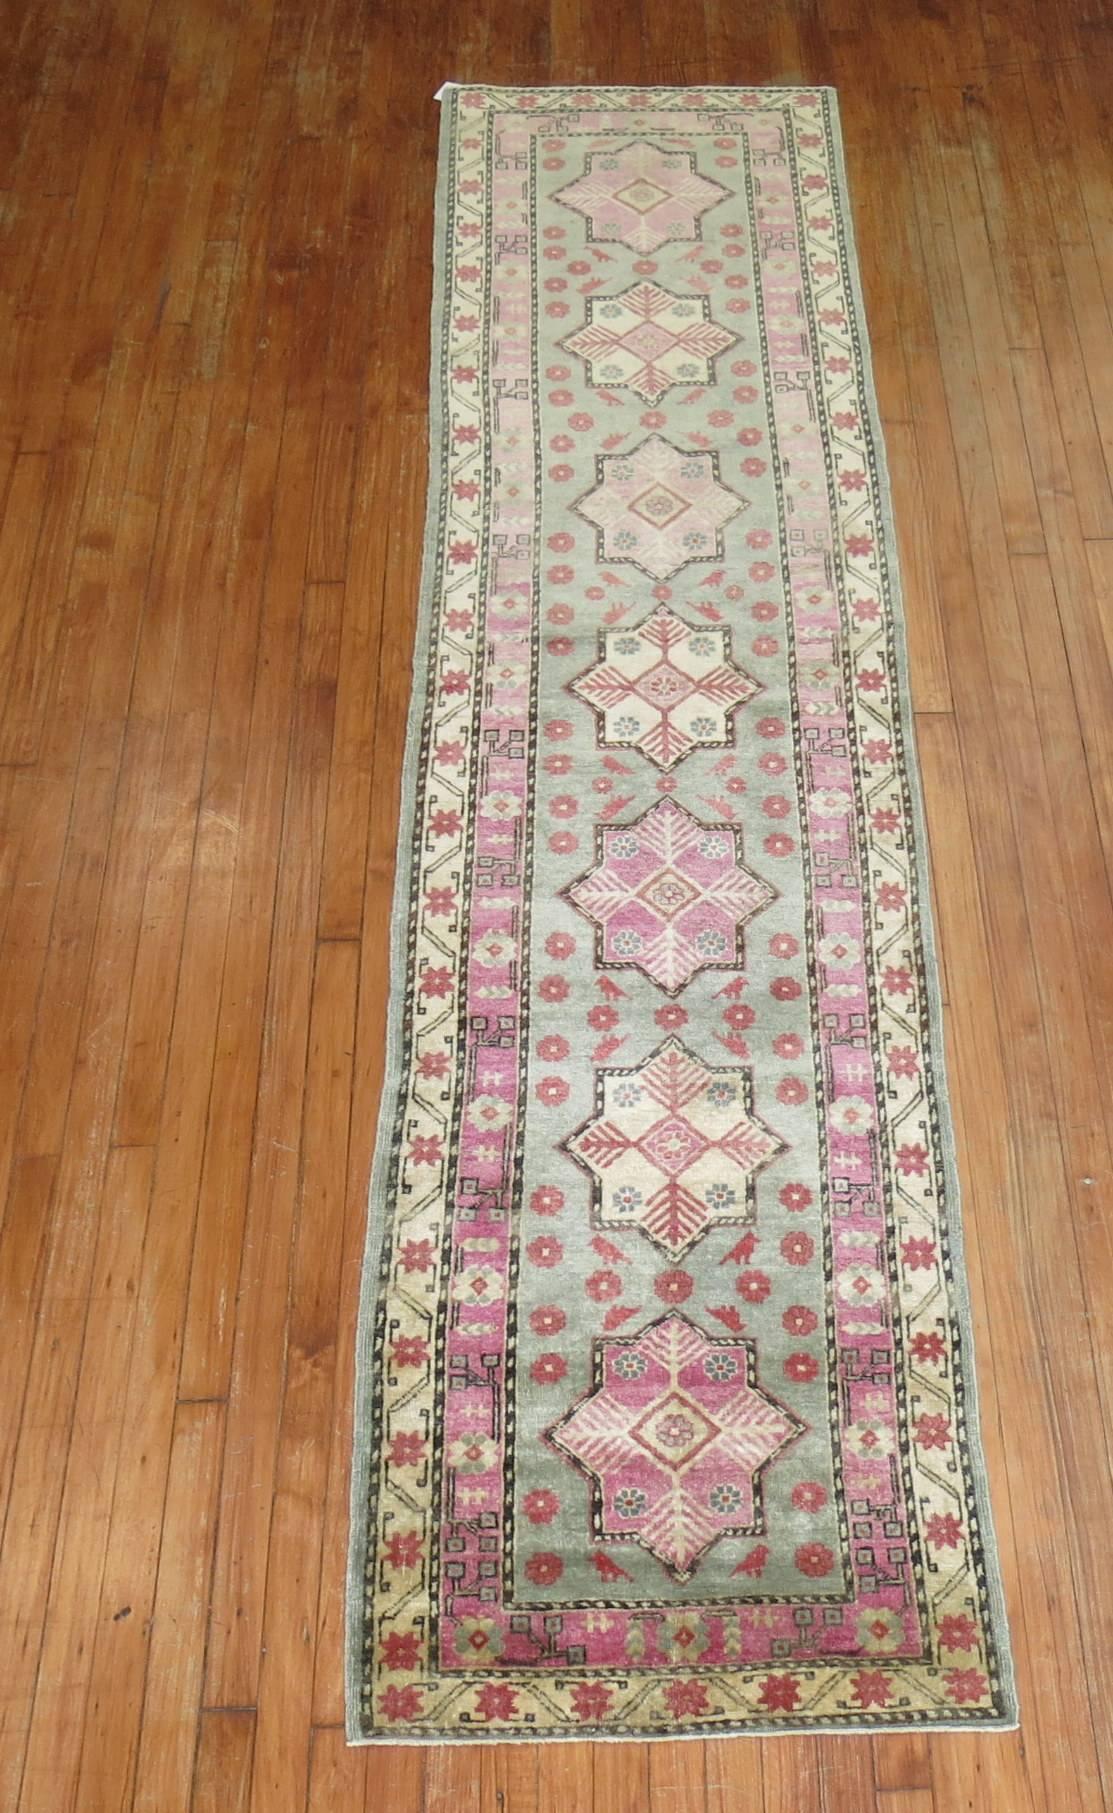 Rare Khotan runner in lovely shades in pink and mint green.

Khotan rugs hail from East Turkestan. Due to its geographical proximity to both Persian and China, Khotan rugs feature predominantly stylized geometric arrangements of traditional